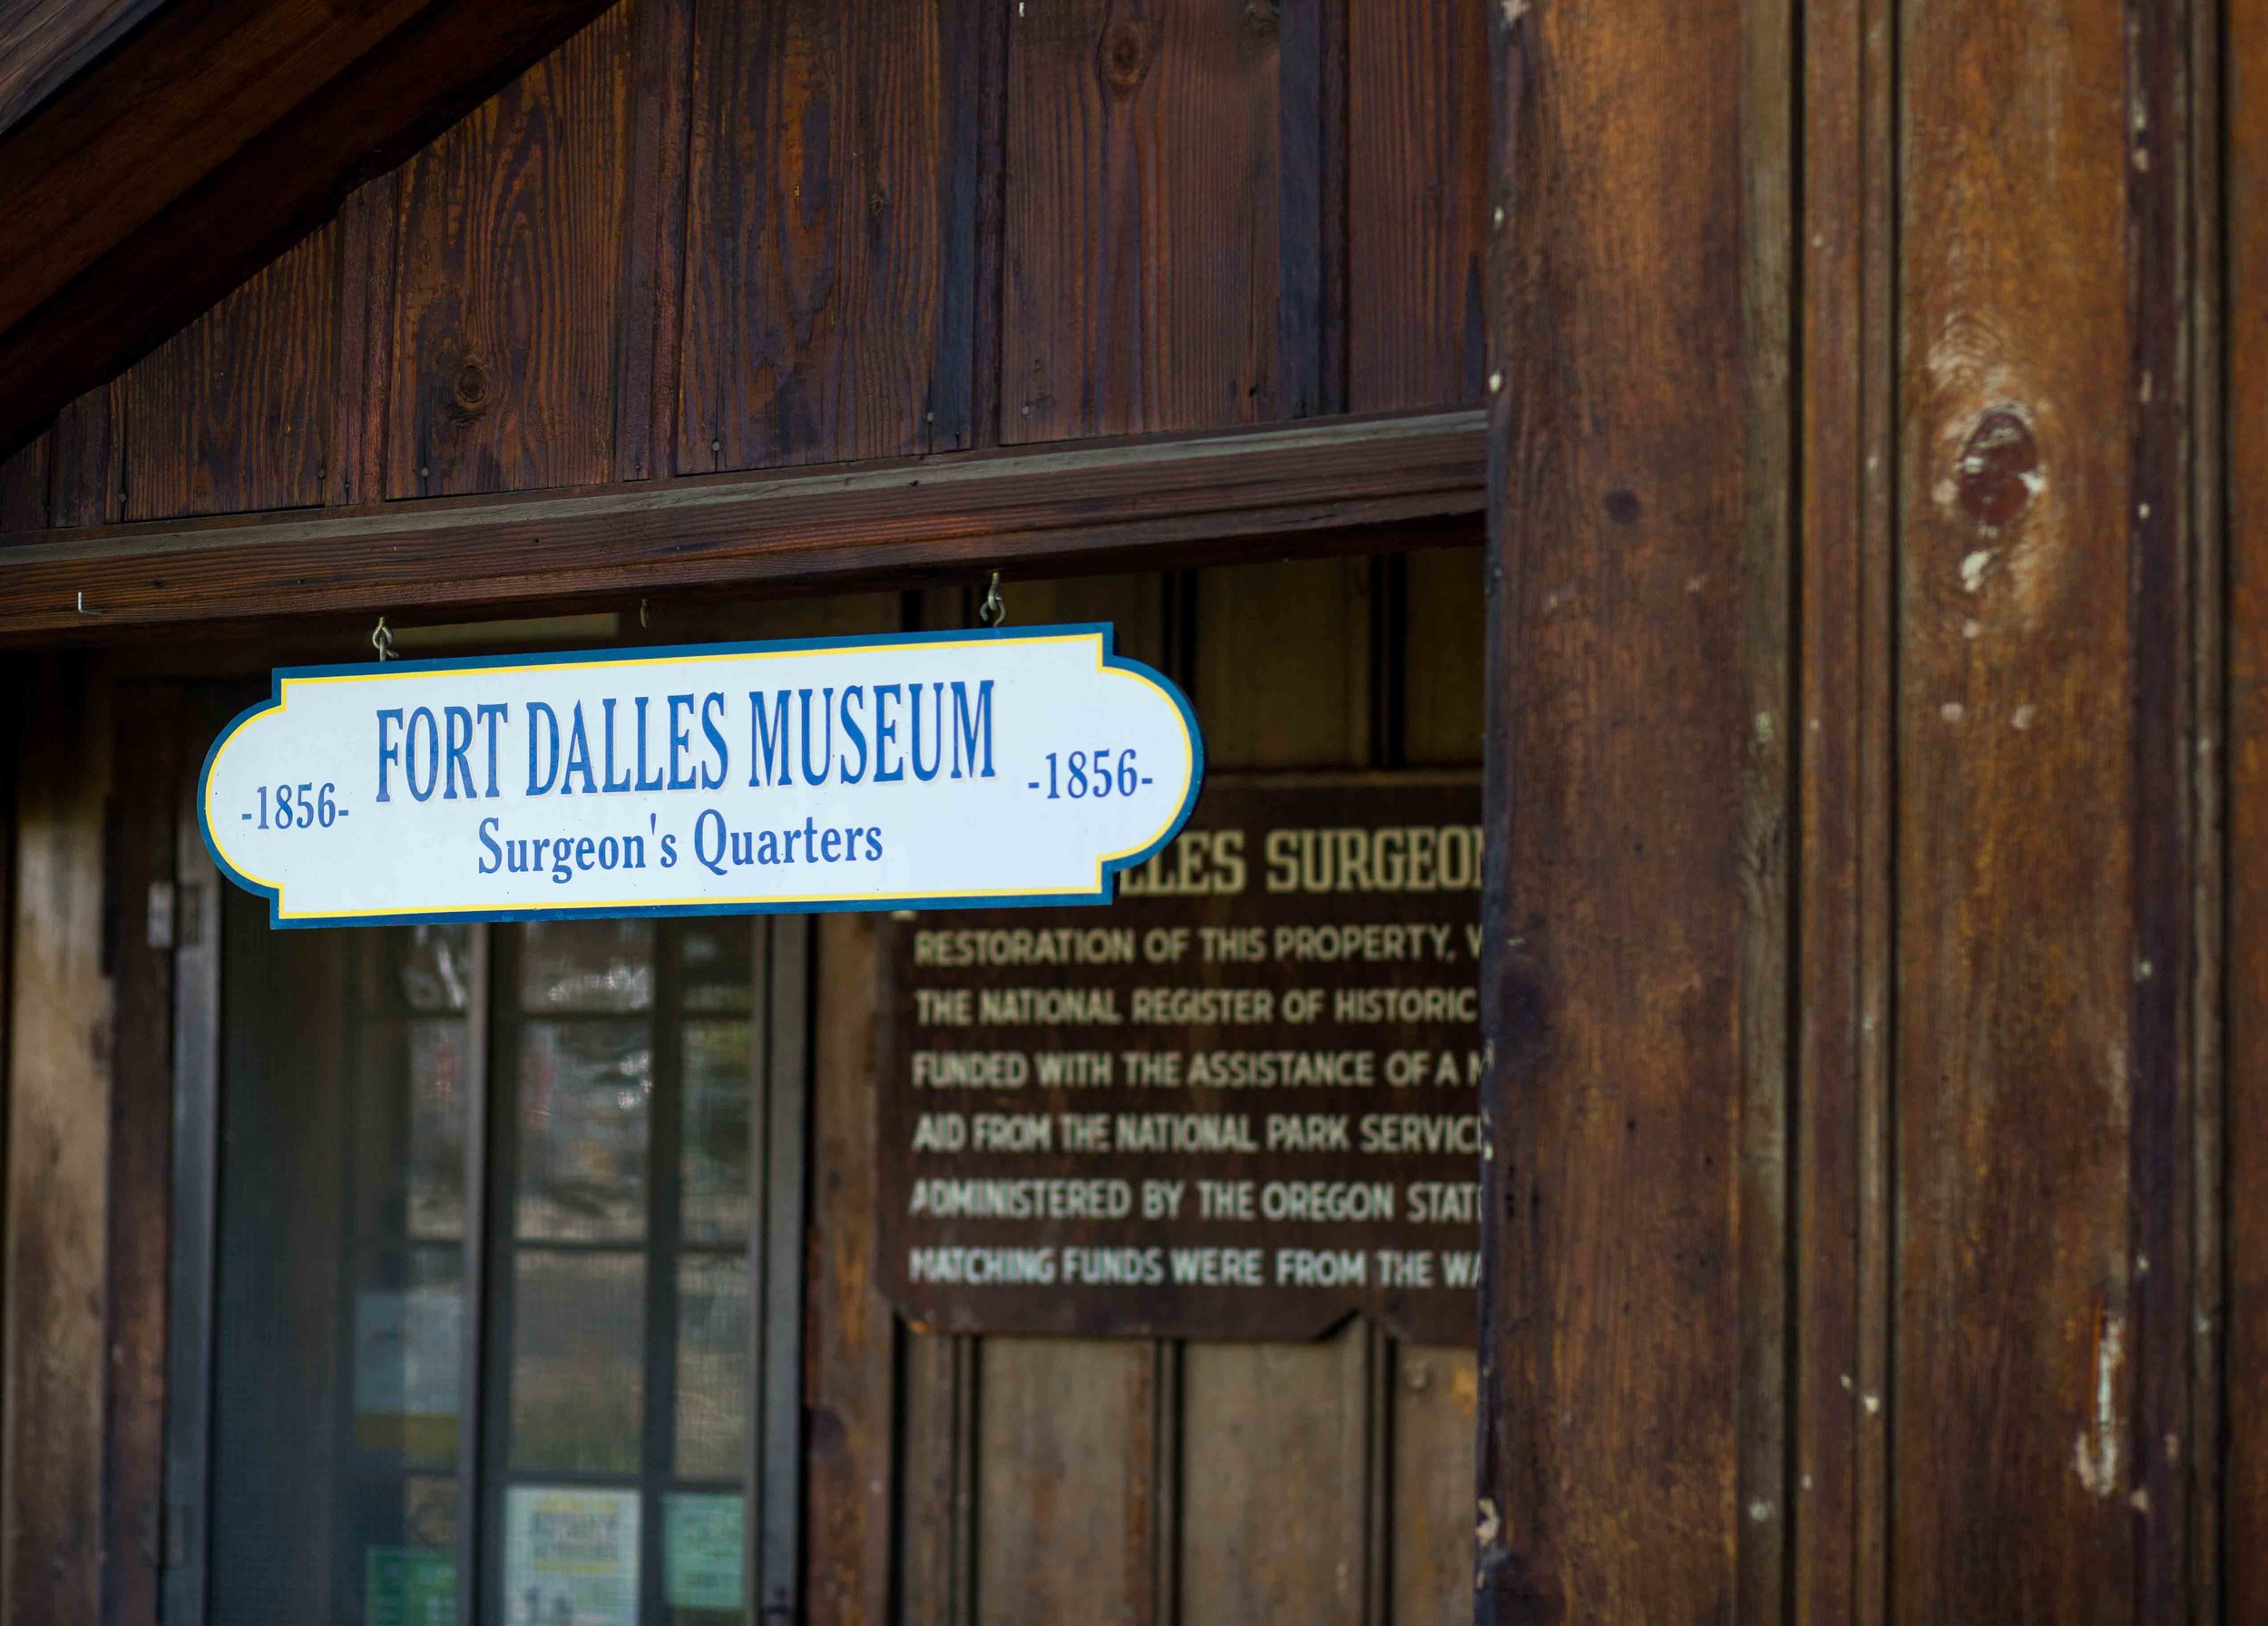 Fort Dalles Fort The Dalles Oregon Historic History Photos Immense Imagery Website 1900 Pioneers Settlers Museum-52.jpg